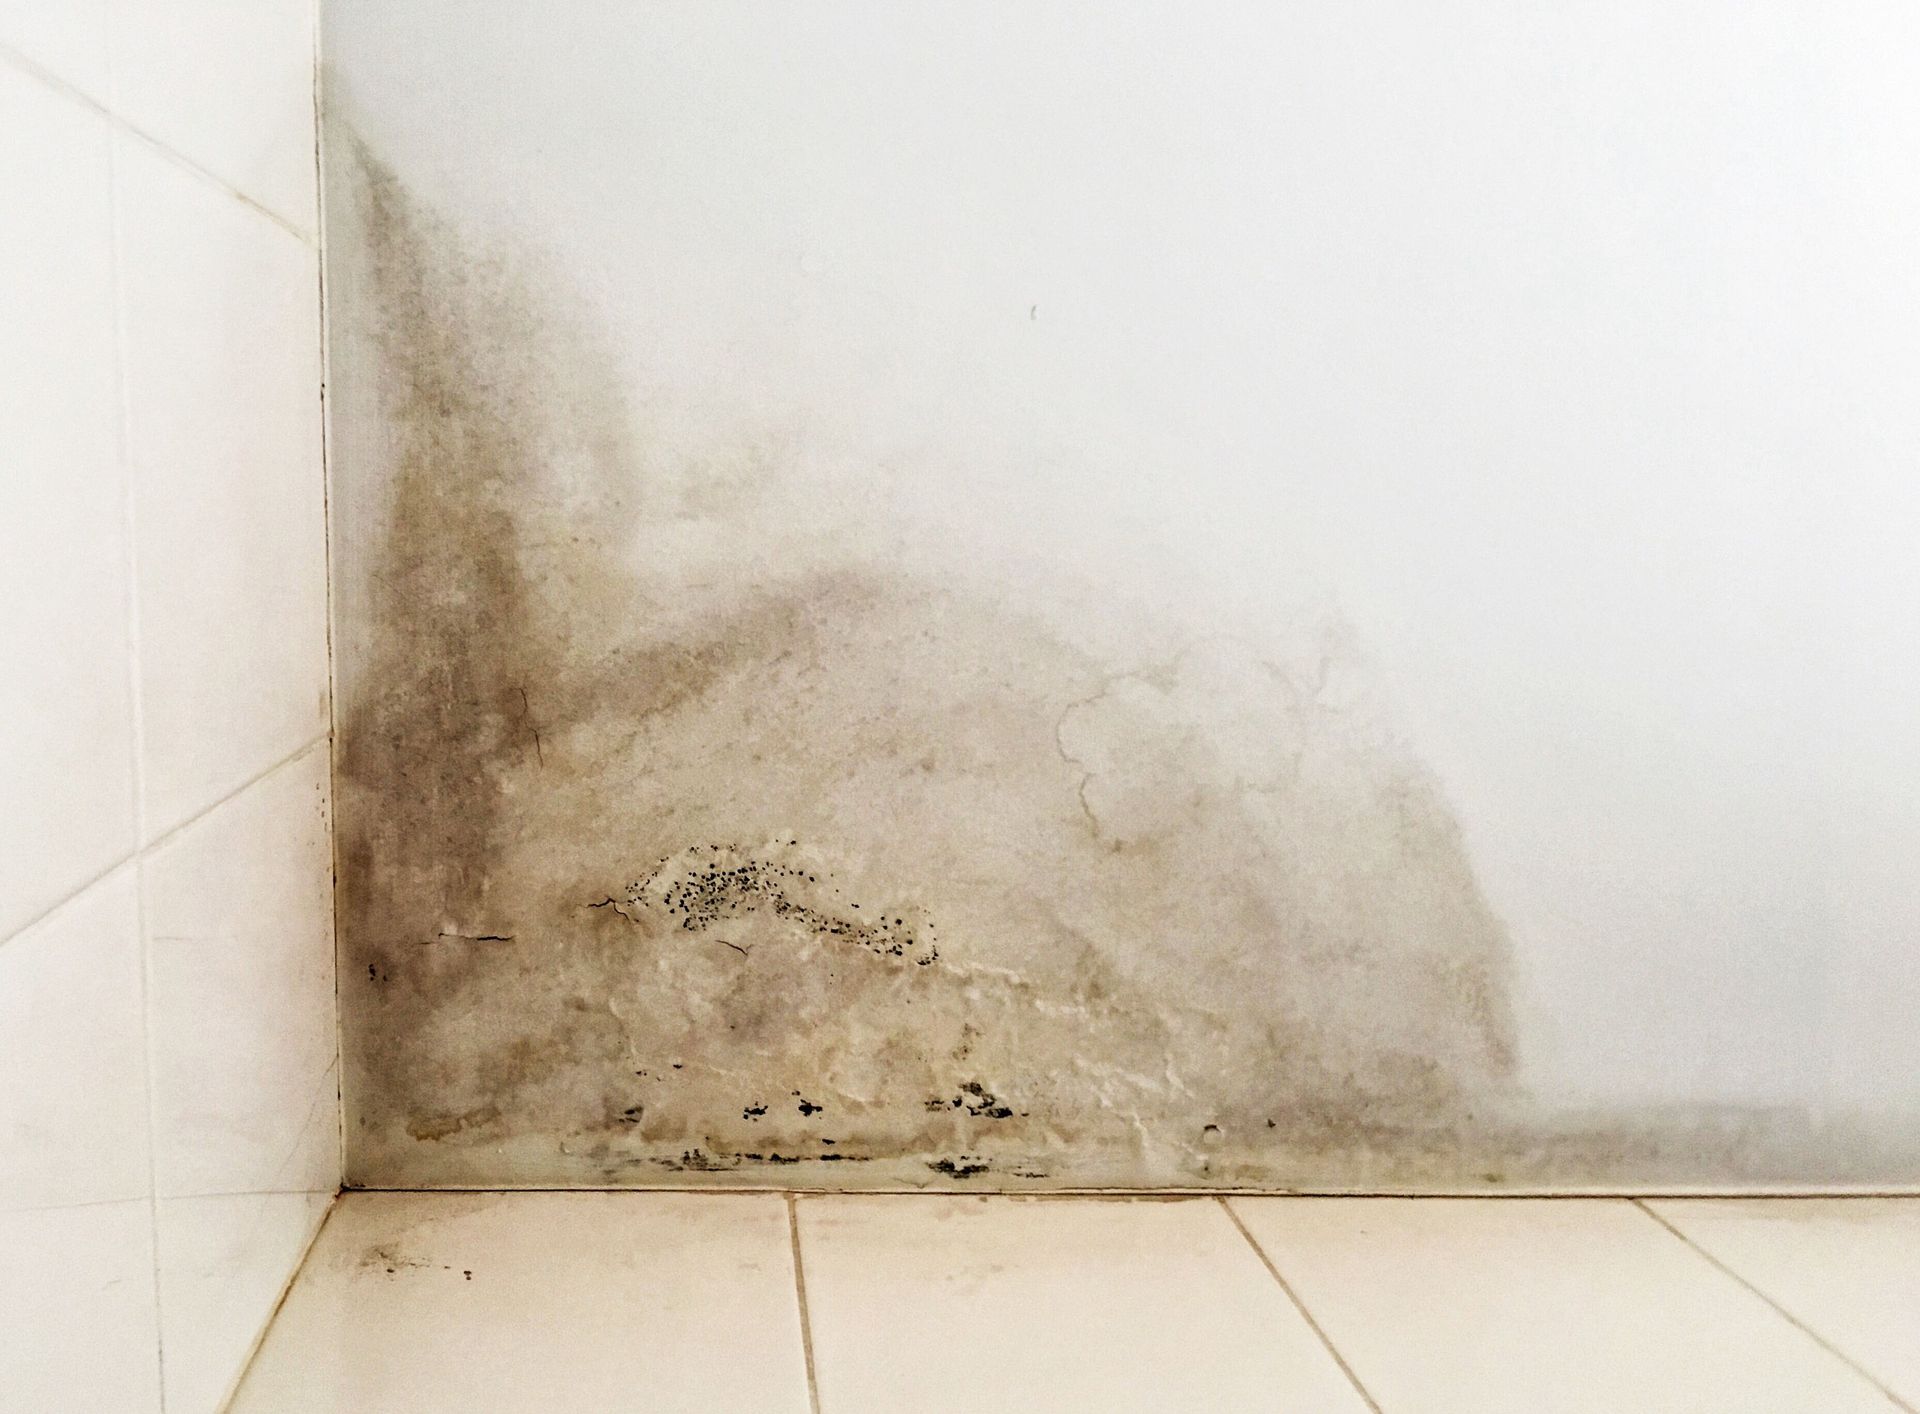 mold testing and removal